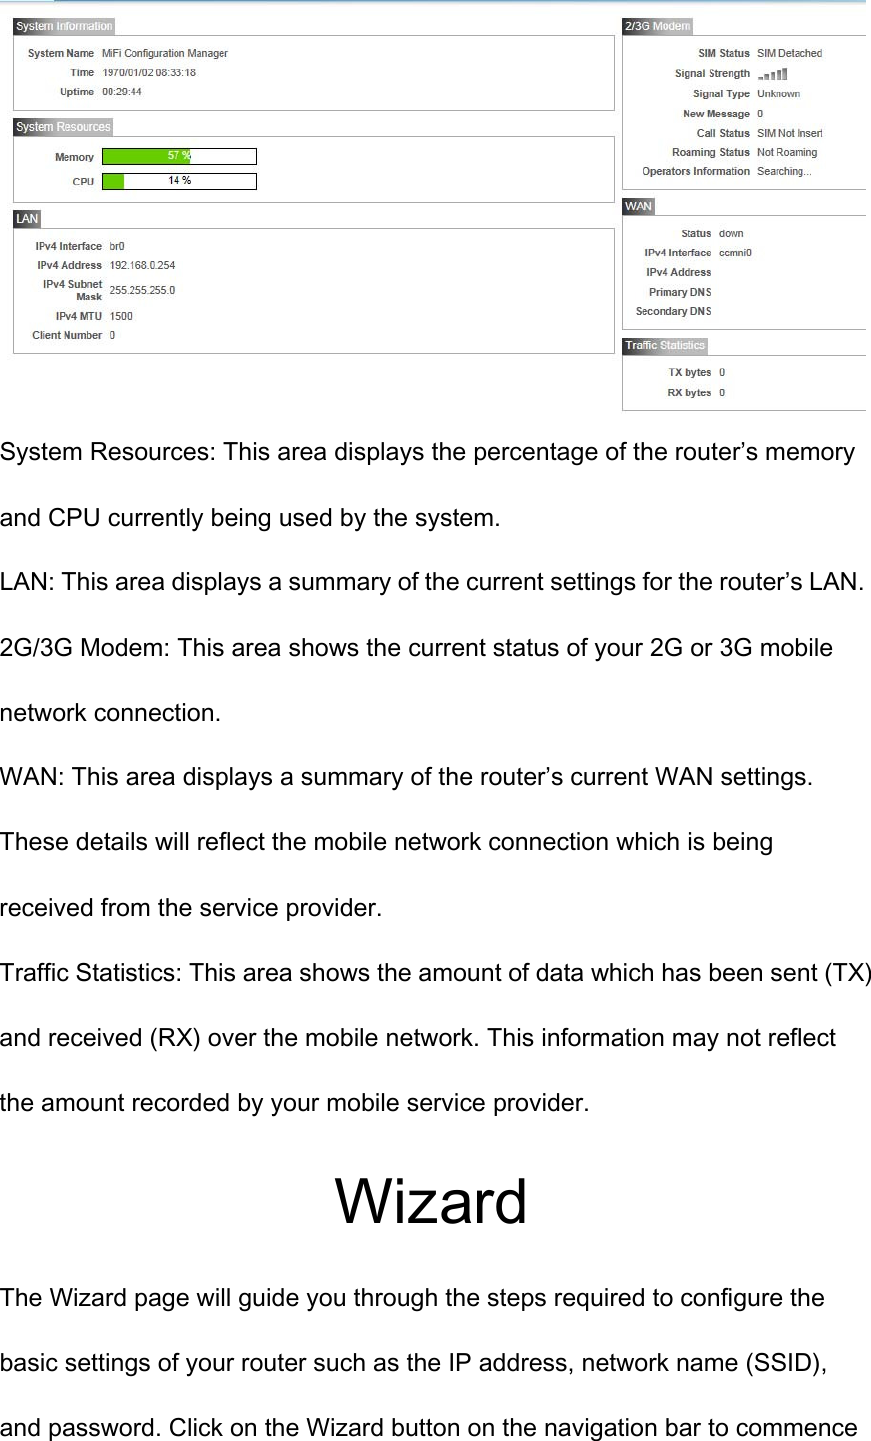  System Resources: This area displays the percentage of the router’s memory and CPU currently being used by the system. LAN: This area displays a summary of the current settings for the router’s LAN. 2G/3G Modem: This area shows the current status of your 2G or 3G mobile network connection. WAN: This area displays a summary of the router’s current WAN settings. These details will reflect the mobile network connection which is being received from the service provider. Traffic Statistics: This area shows the amount of data which has been sent (TX)   and received (RX) over the mobile network. This information may not reflect the amount recorded by your mobile service provider. Wizard The Wizard page will guide you through the steps required to configure the basic settings of your router such as the IP address, network name (SSID), and password. Click on the Wizard button on the navigation bar to commence 